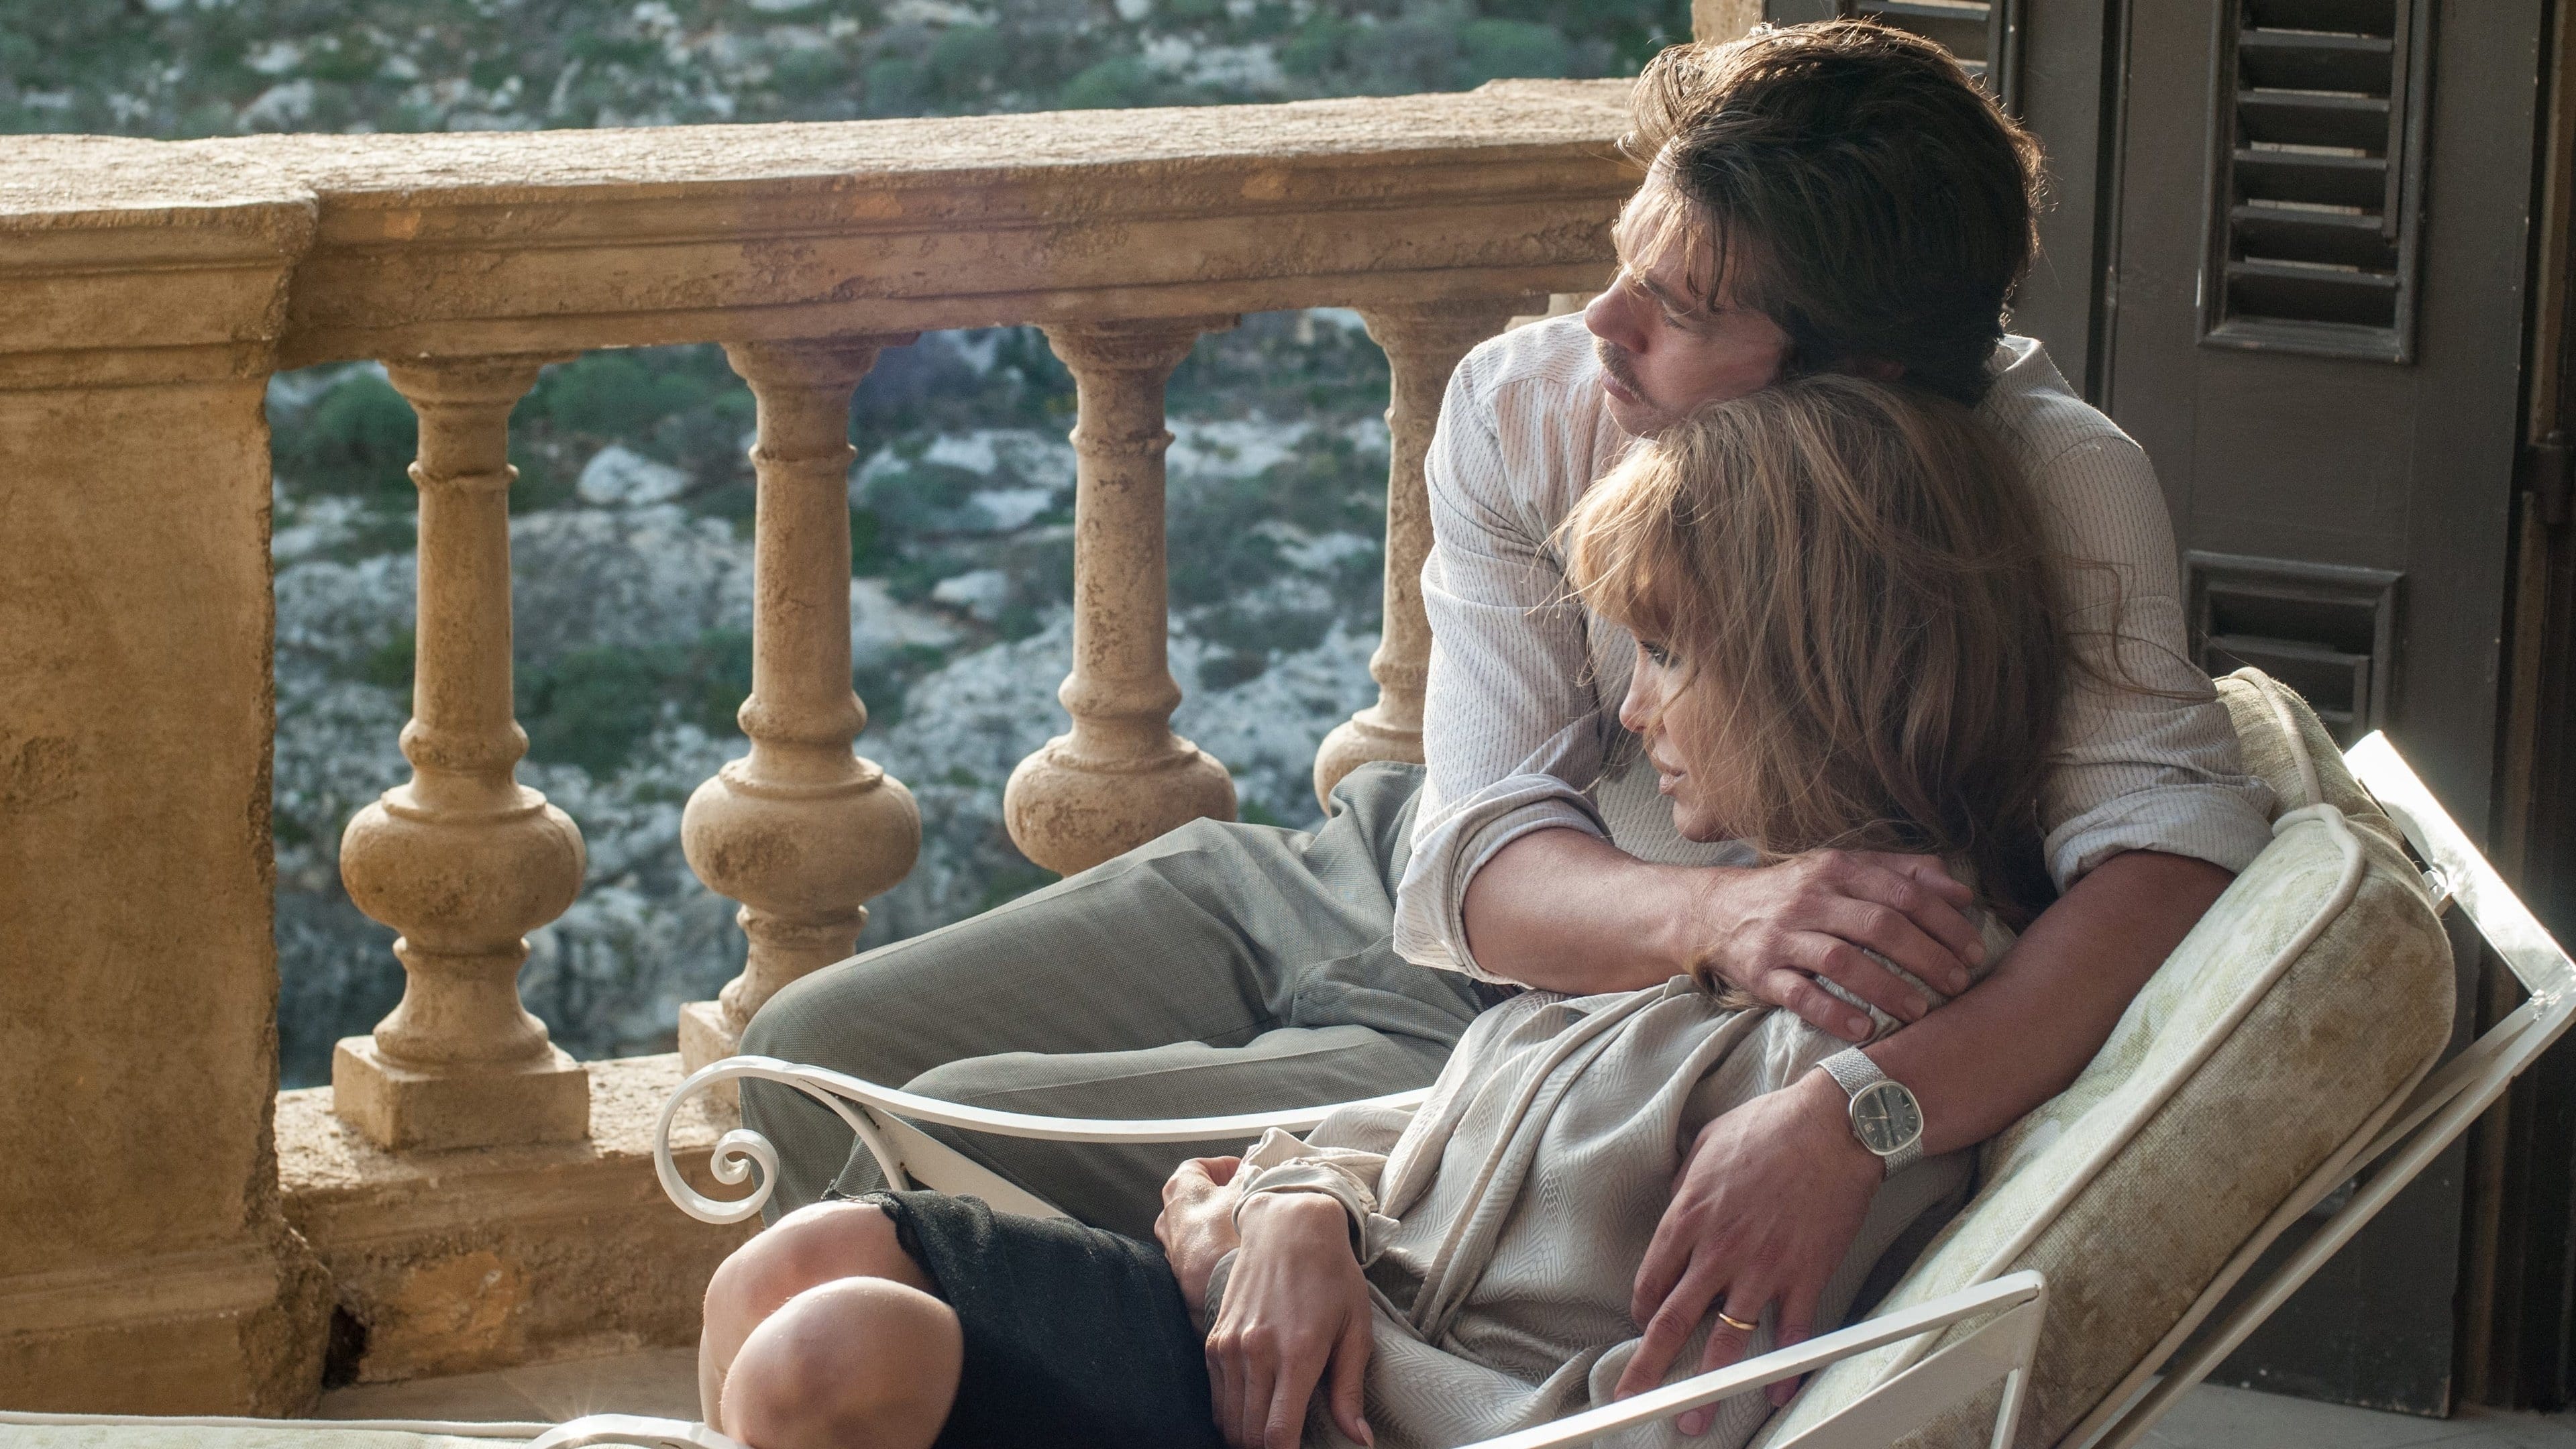 By the Sea 2015 123movies